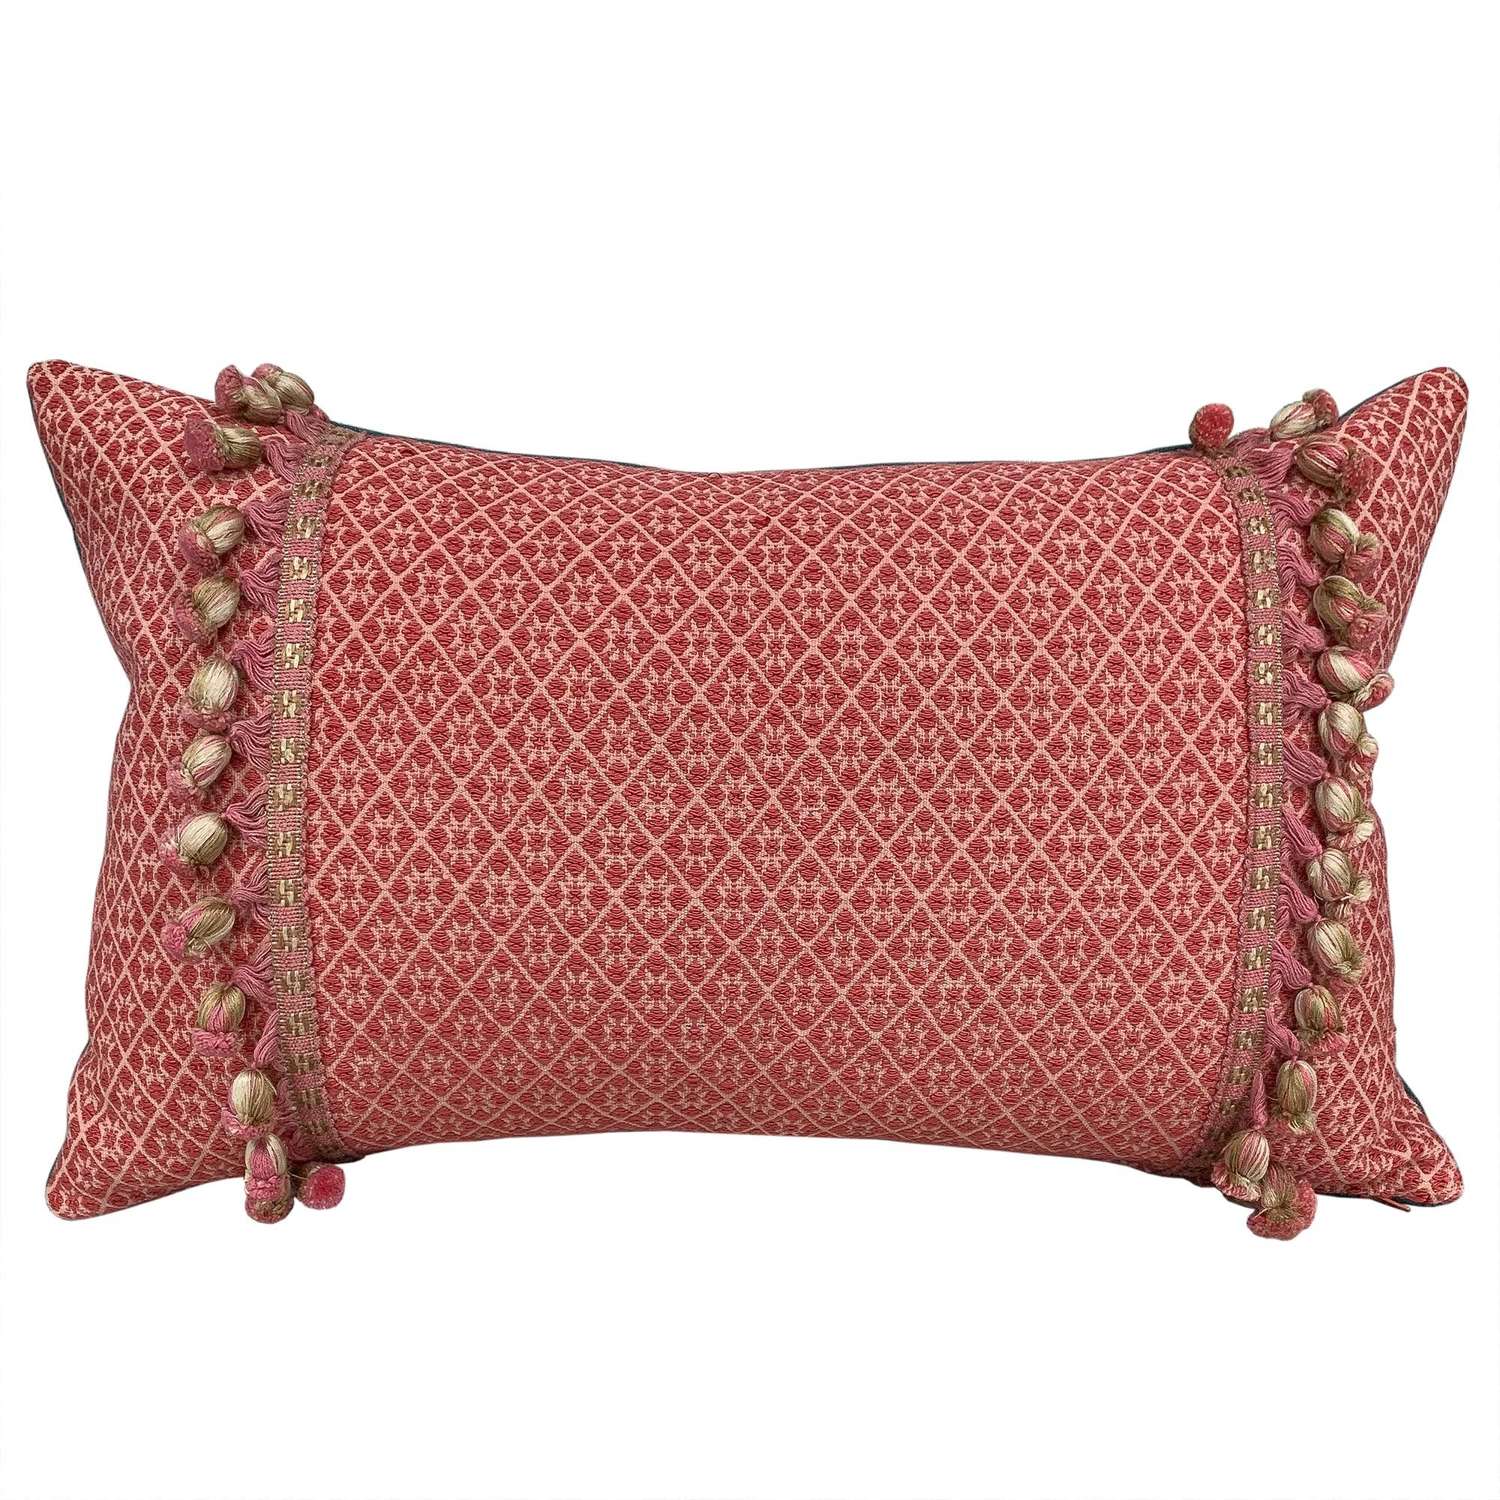 Coral Zhuang cushions with bobble trim